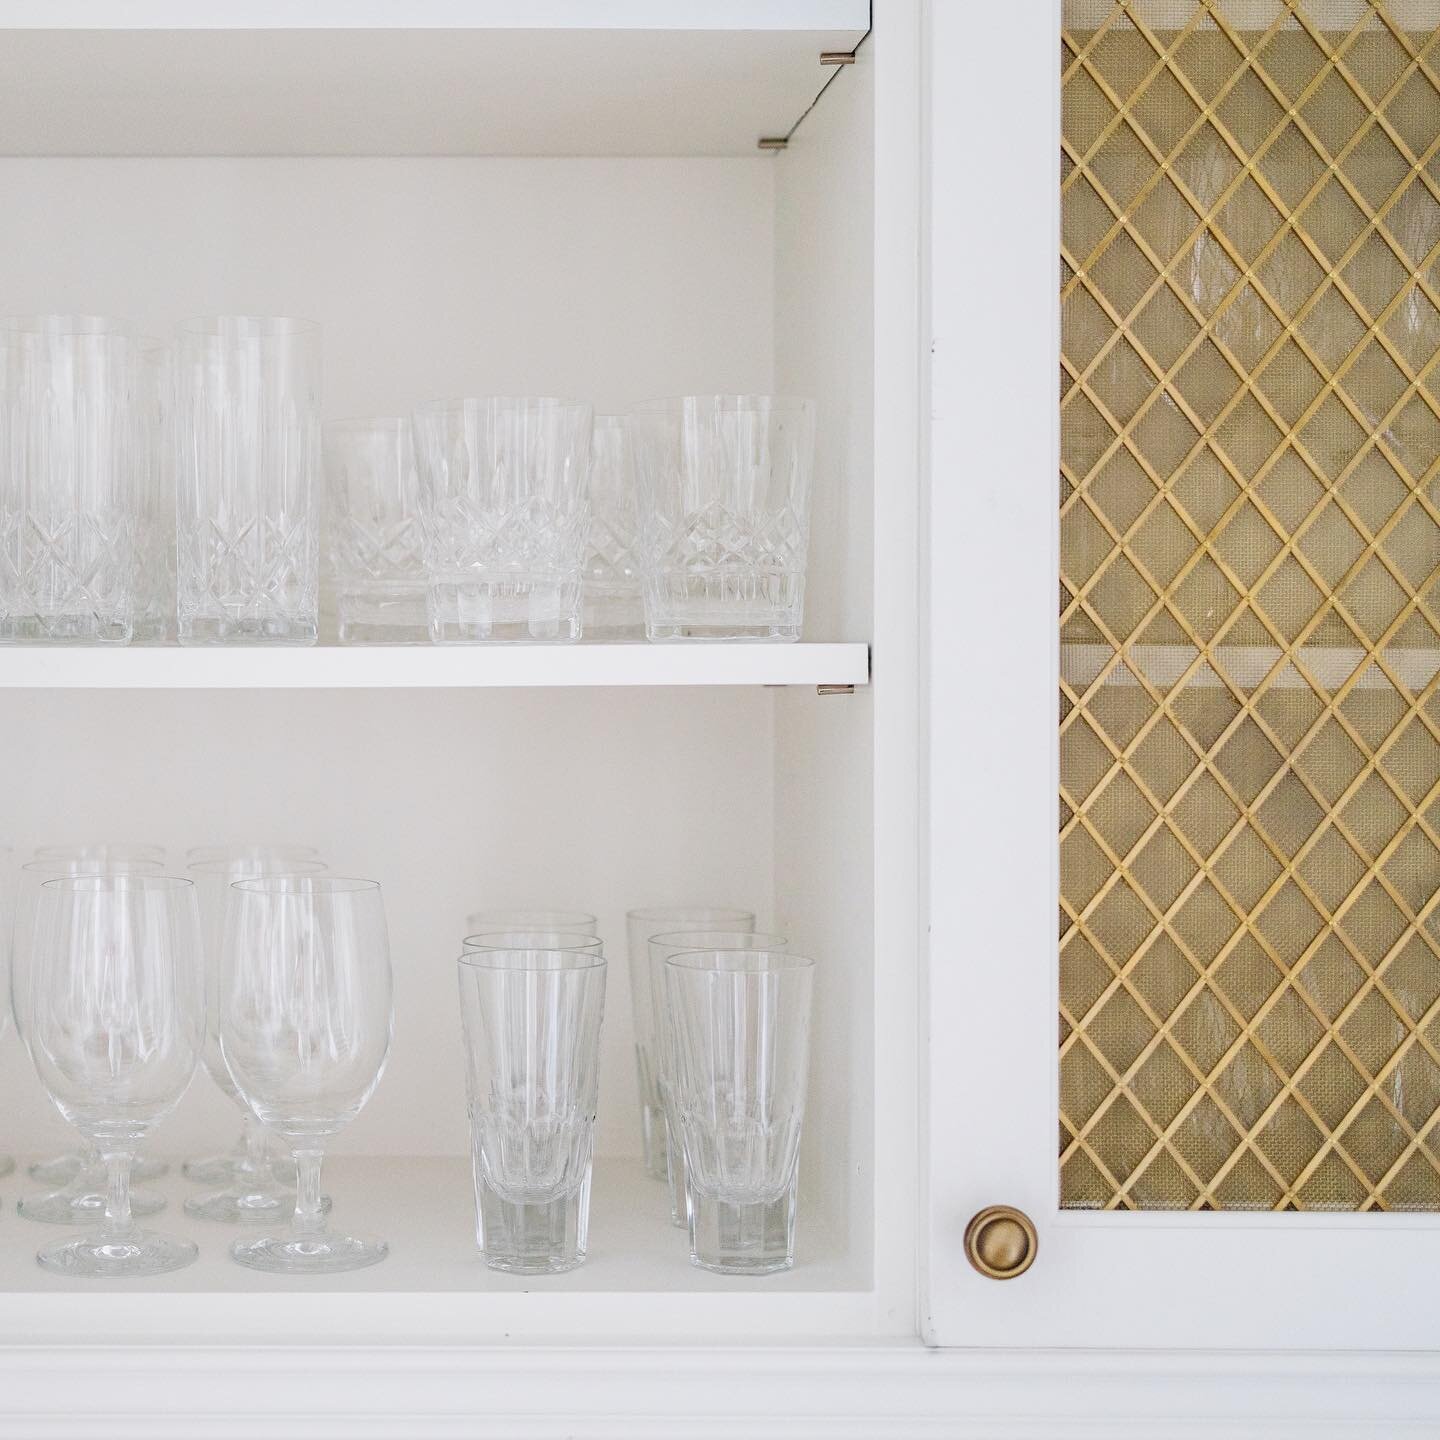 cheers to a long, labor-less  weekend 🥂 and to saying farewell to summertime! 

#laborday #labordayweekend #bardesign #bardecor #barcart #barcartstyling #glassware #houstoninteriordesign #cheers #cheerstotheweekend #longweekend